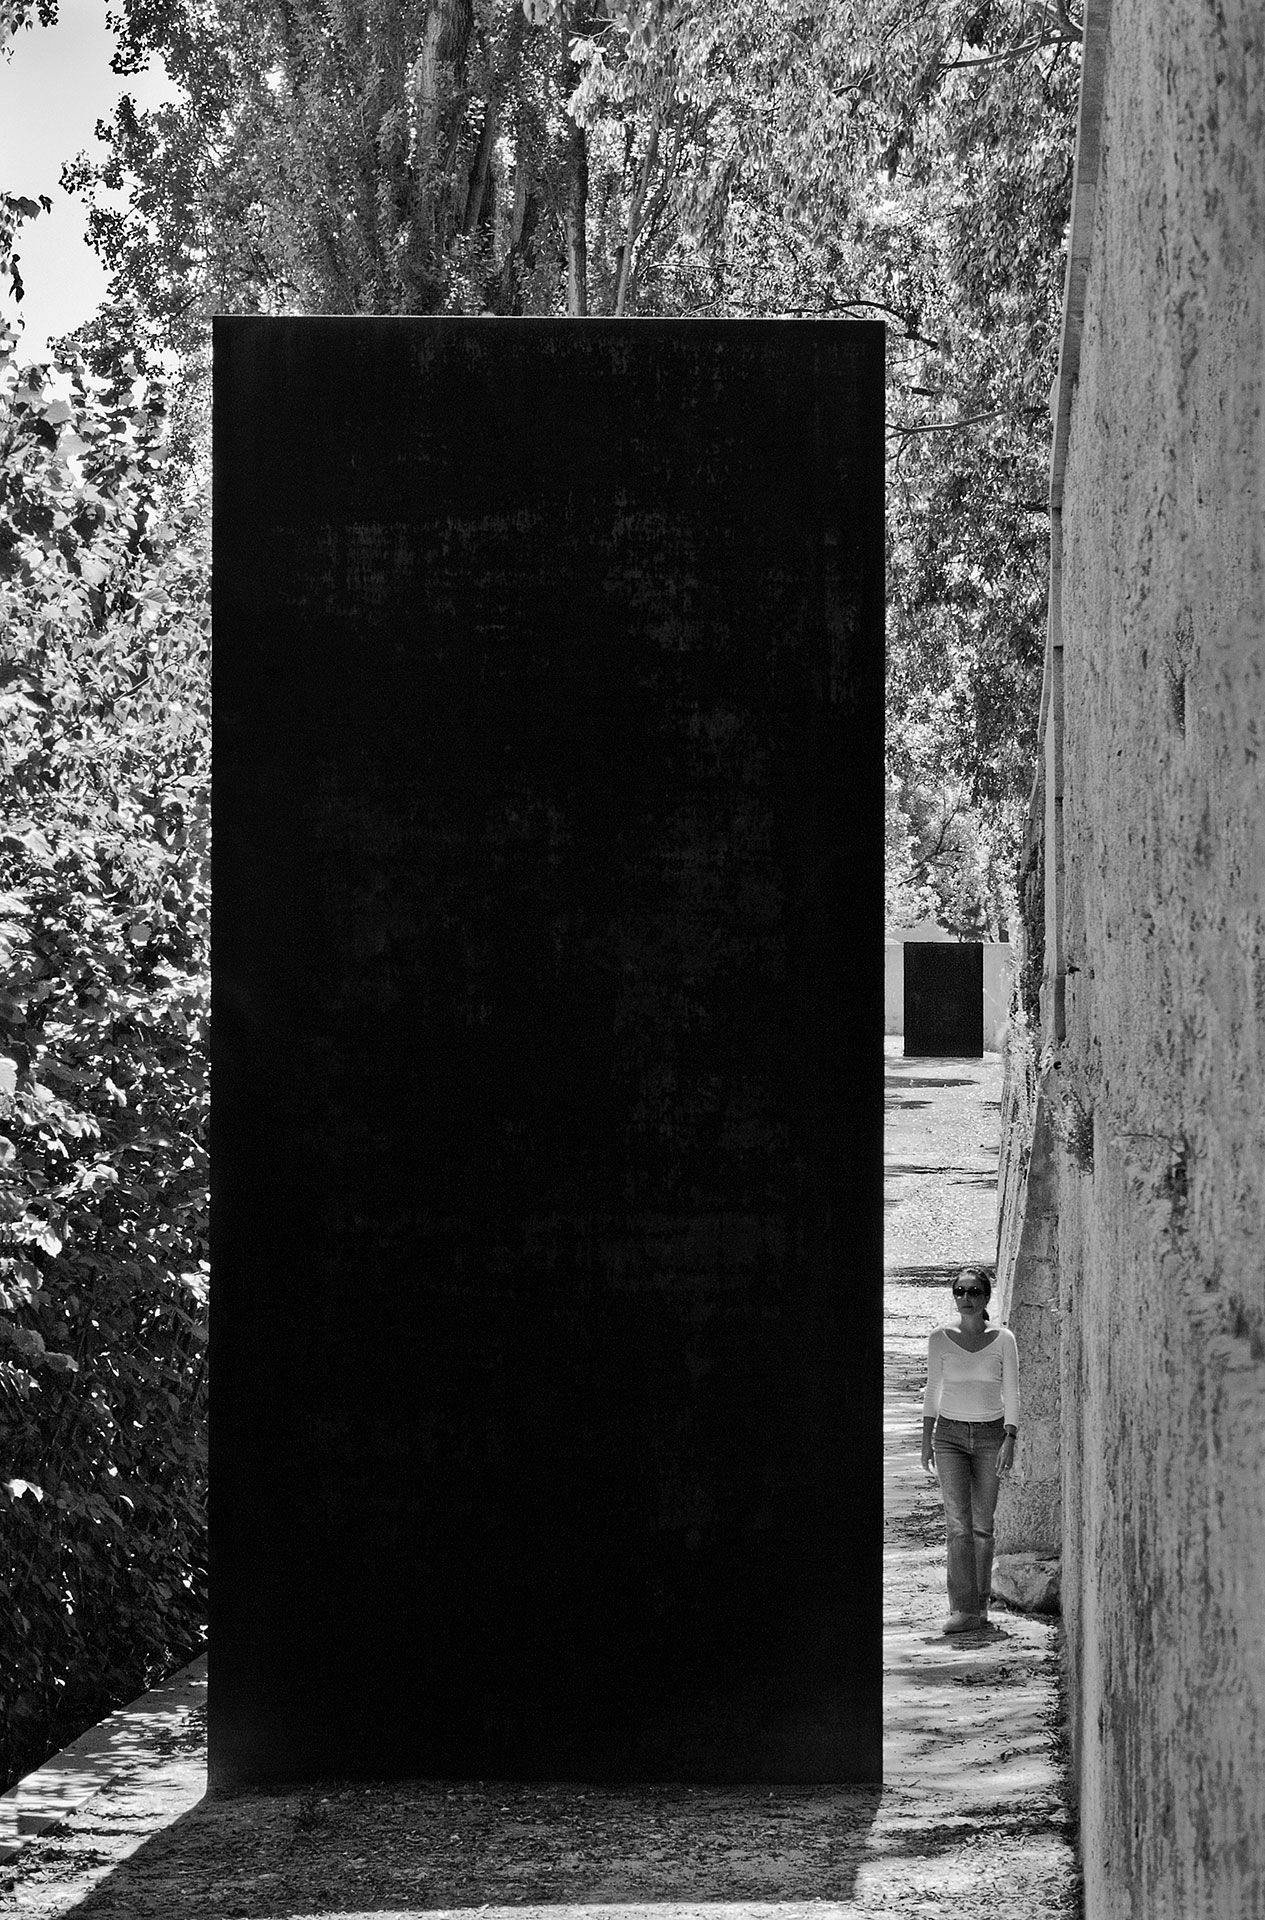 Two steel sculptures by Richard Serra titled Walking is Measuring, dated 1999-2000.